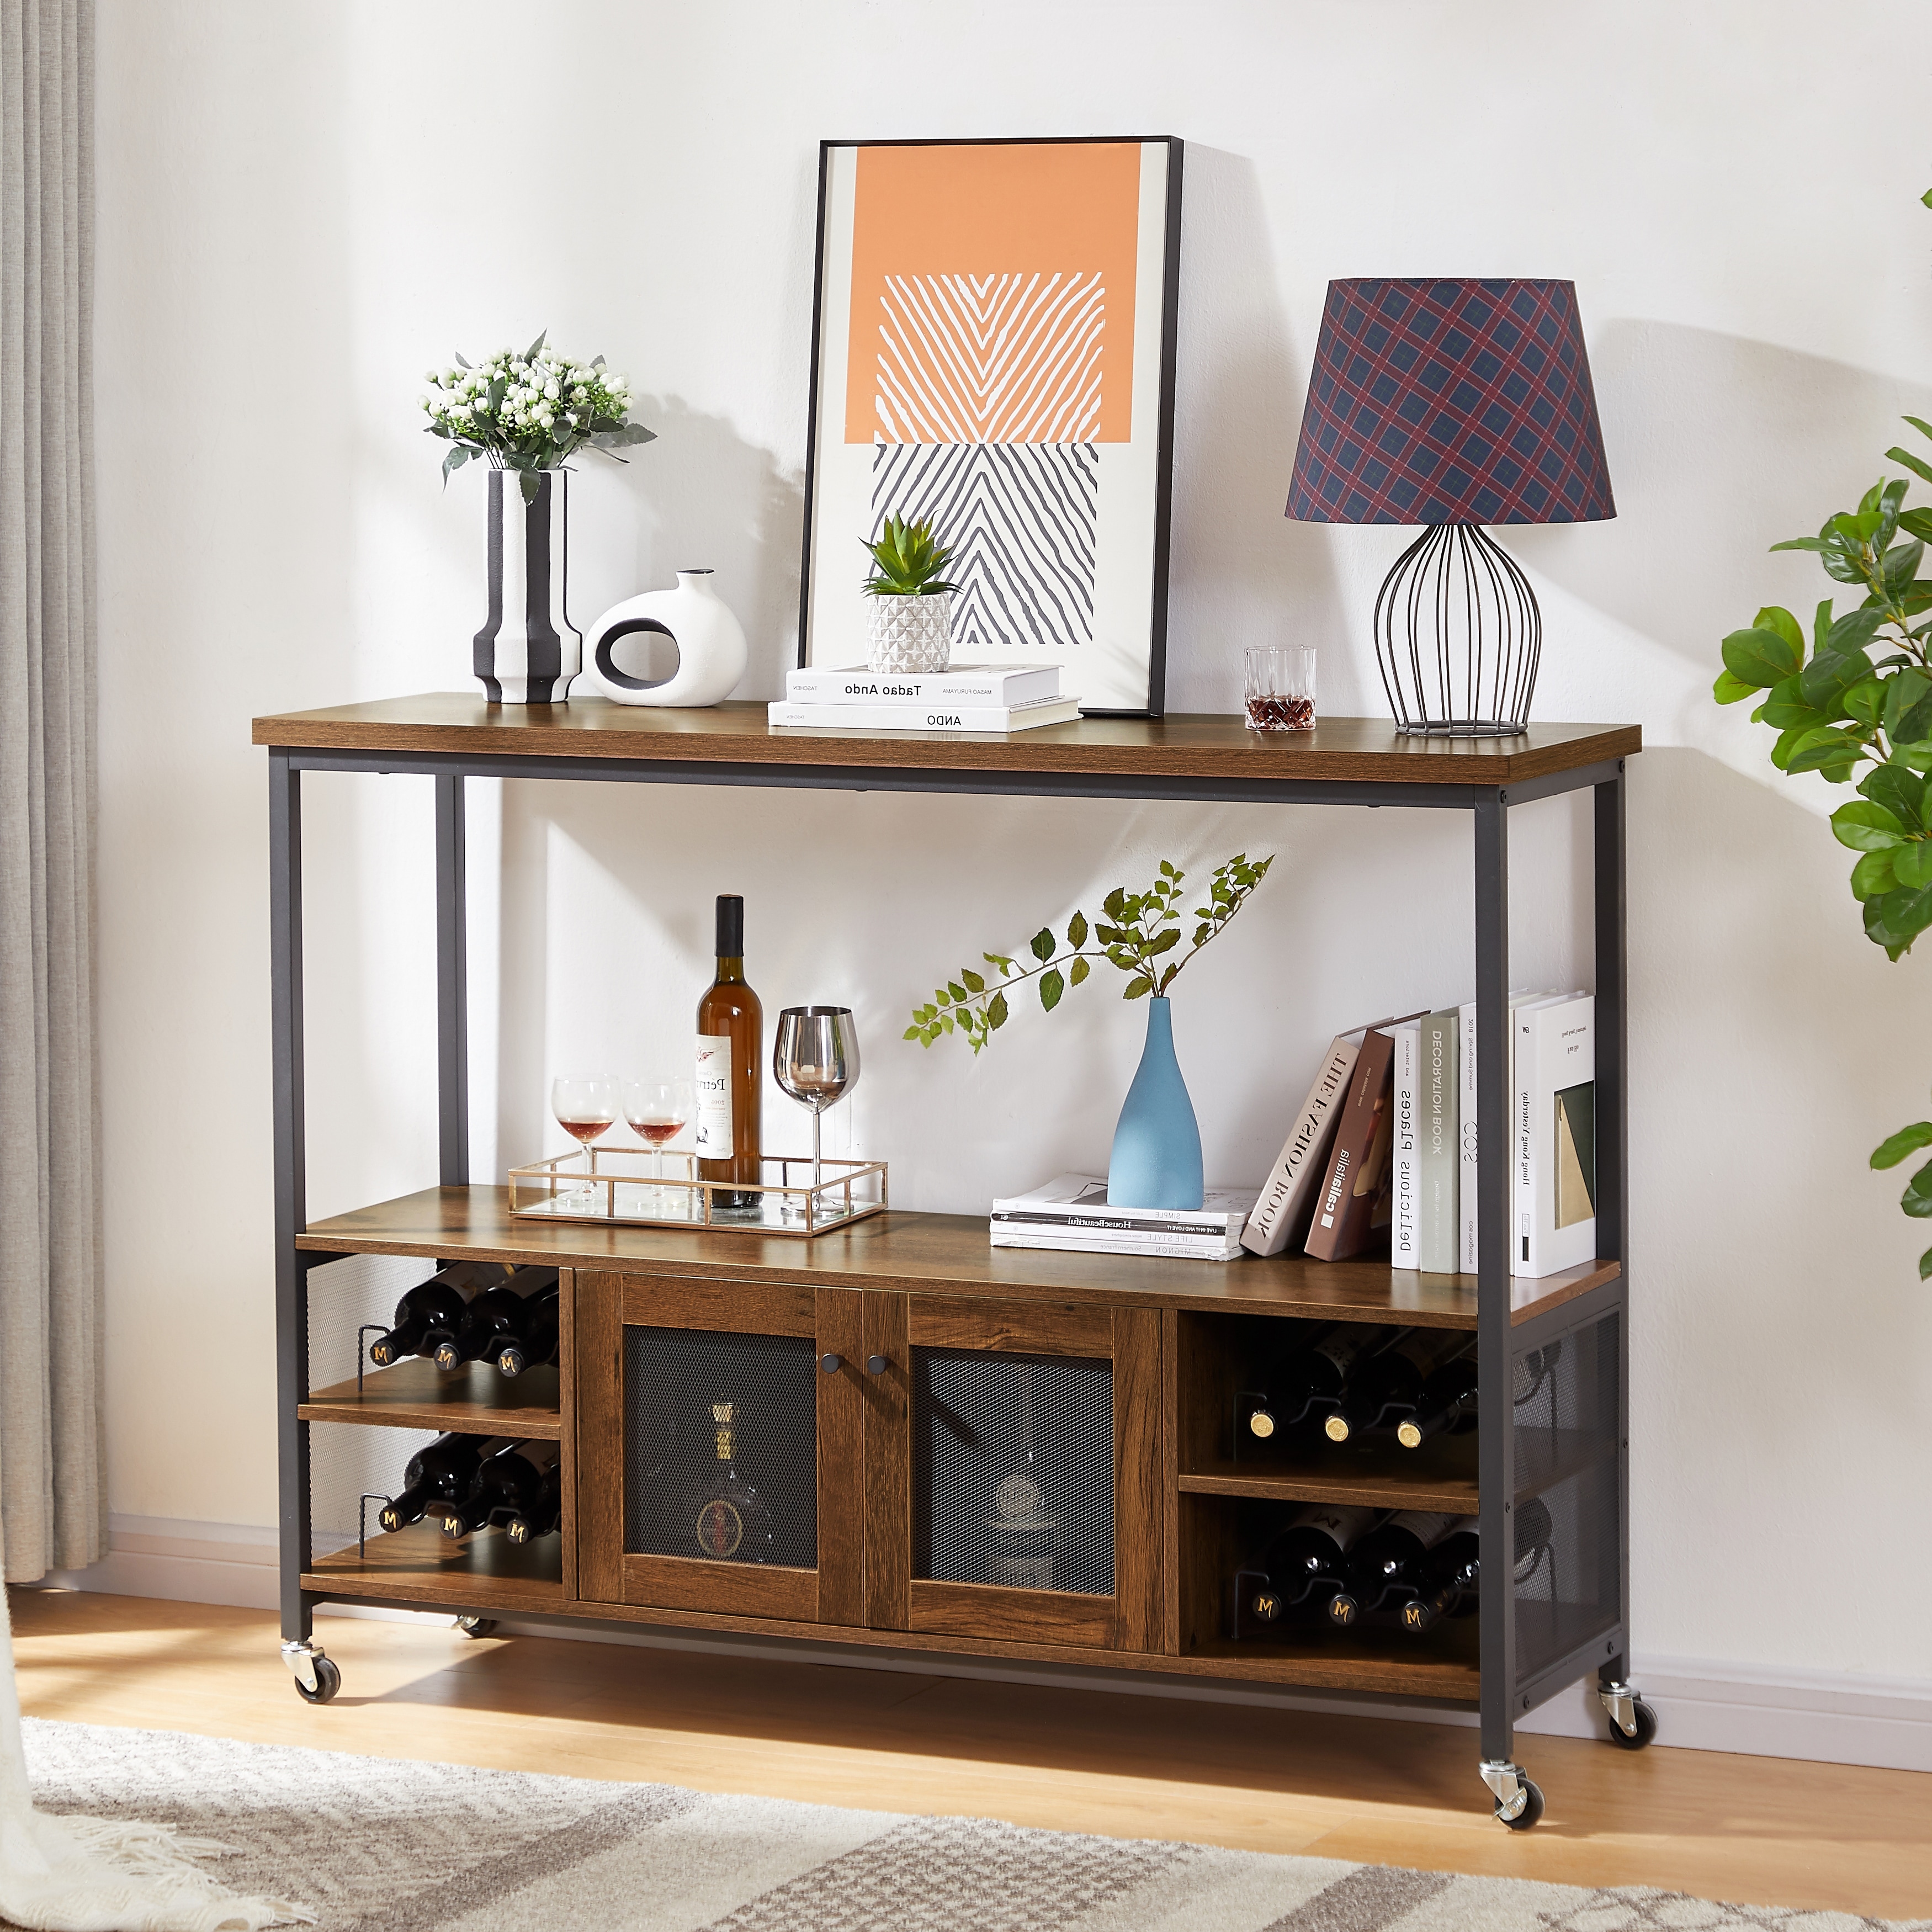 Classic Rustic Tv Stand With Metal Frame and Open Shelves  Tv Cabinet With Mesh Cabinets Double Doors and Ample Storage Compartment